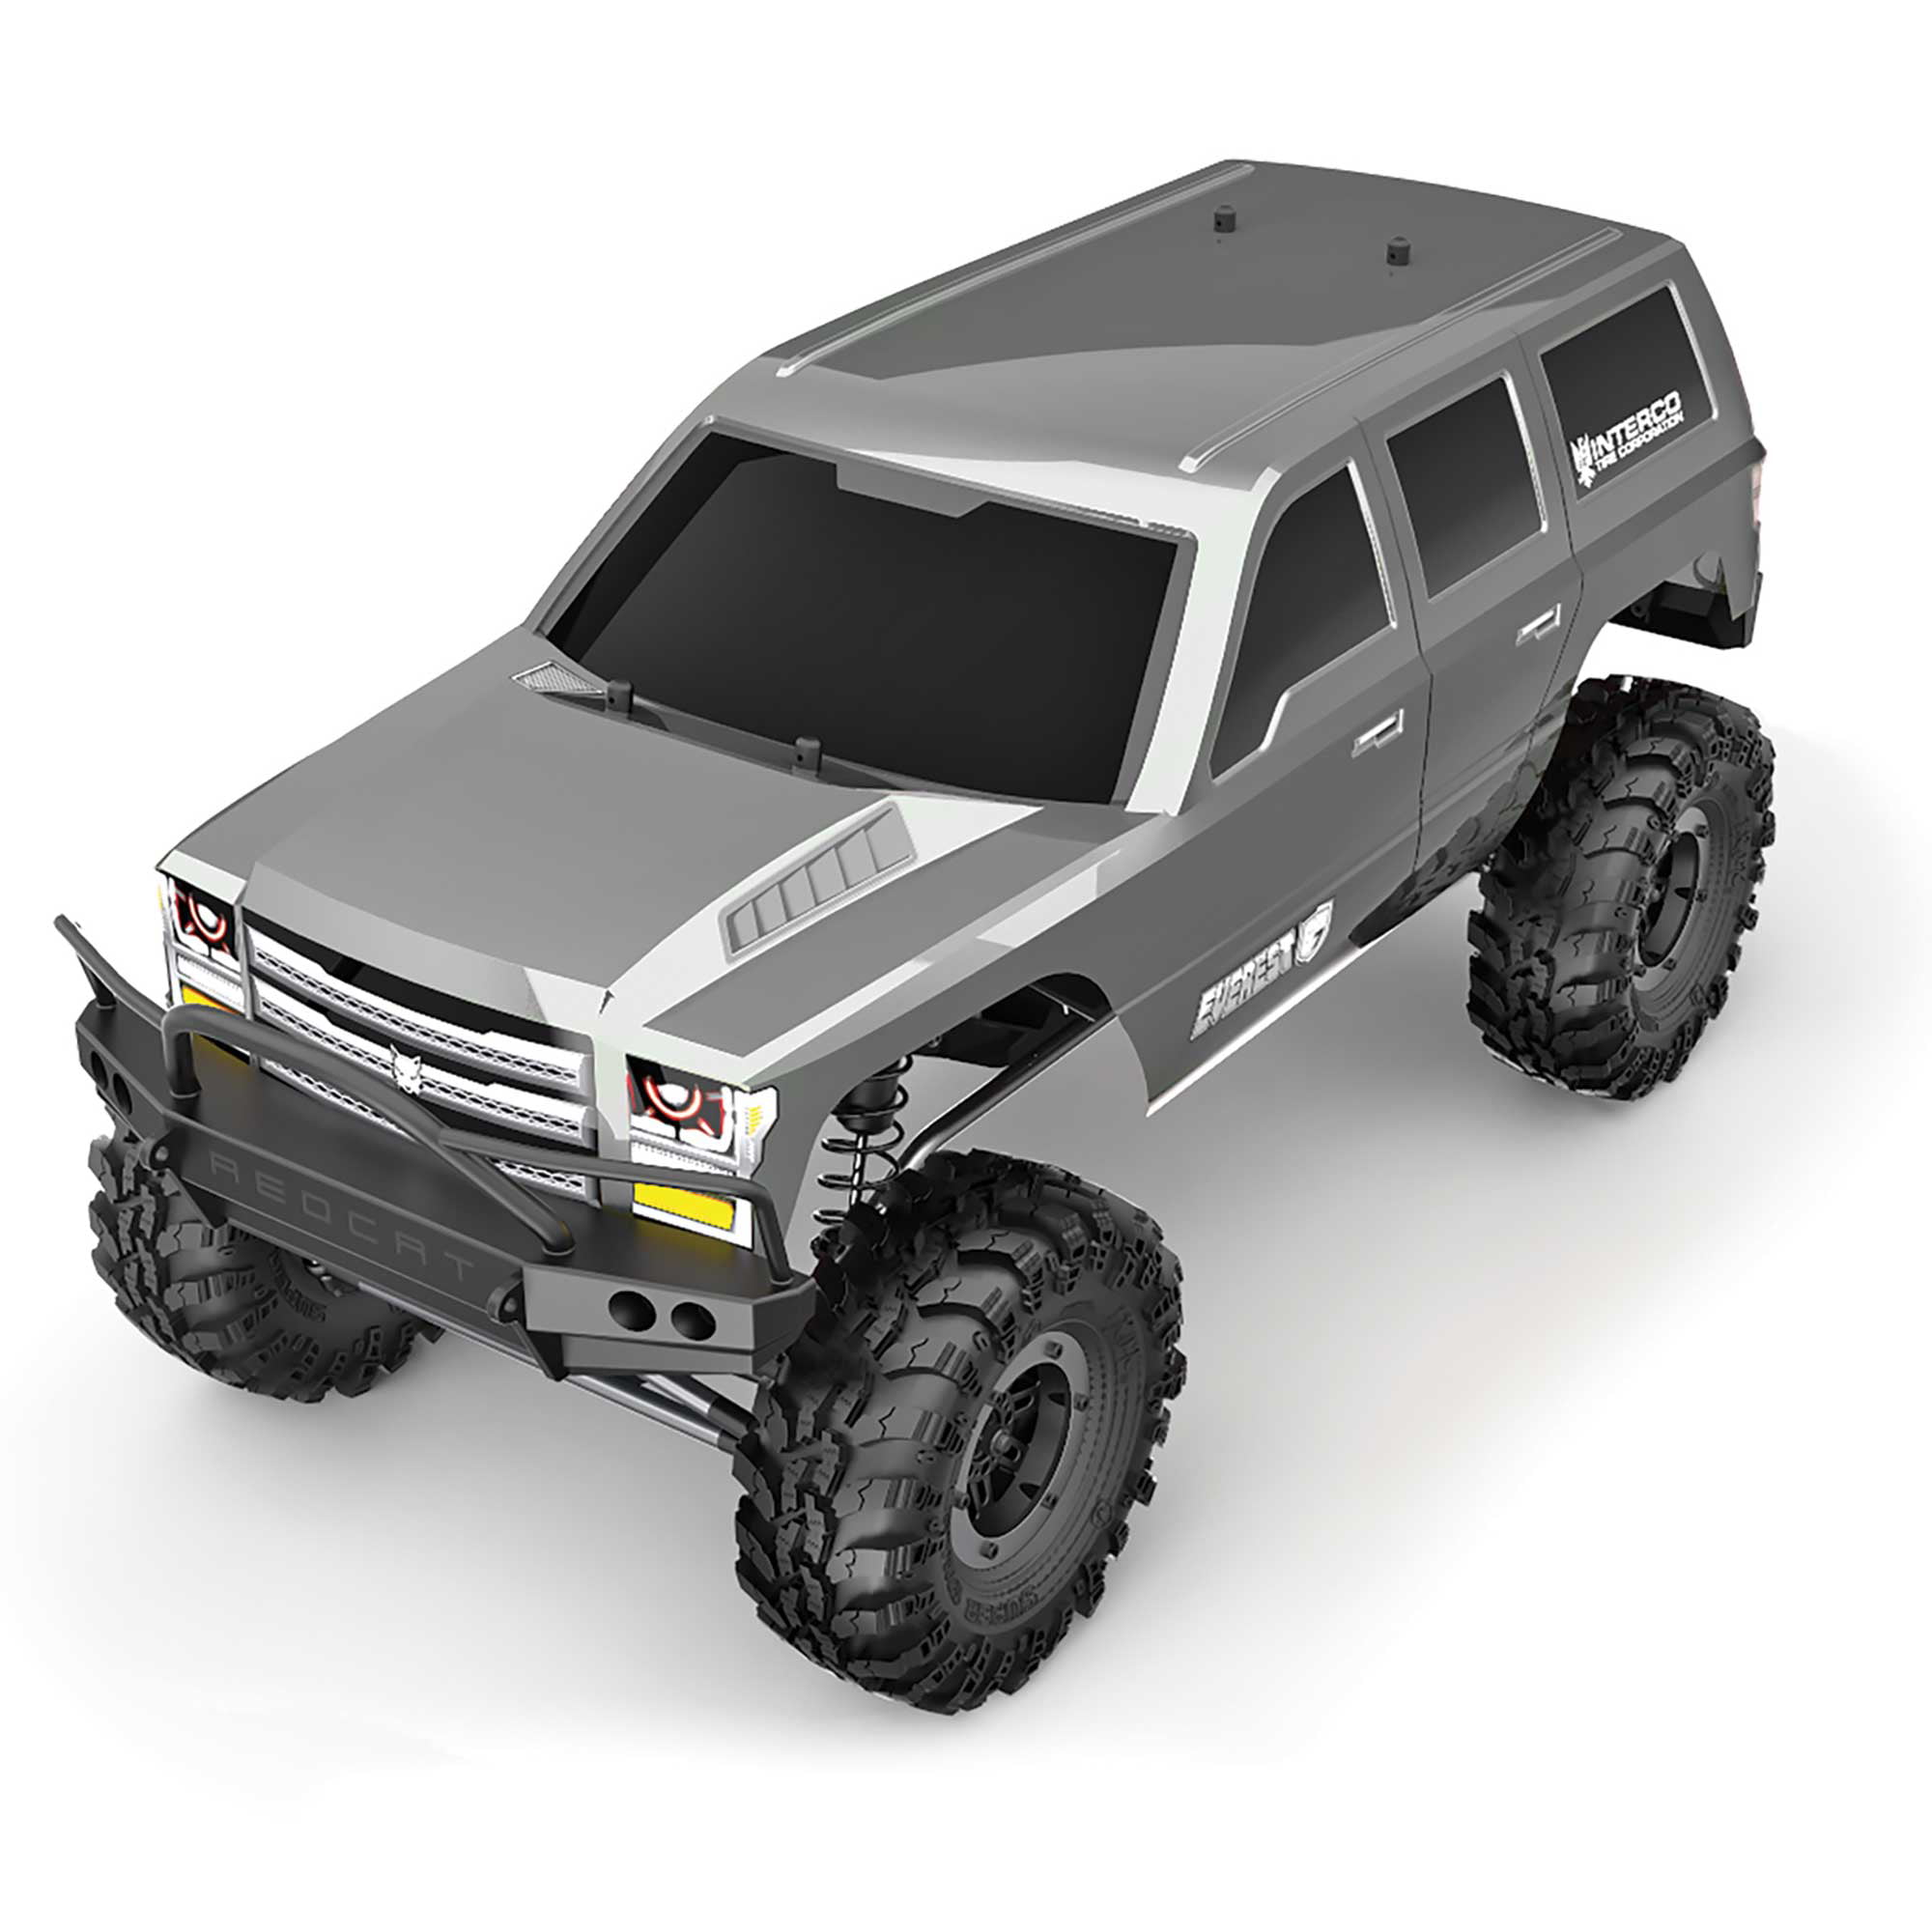 New Redcat Racing Everest Gen7 Sport 1/10 Scale Off-Road RC Truck Silver 